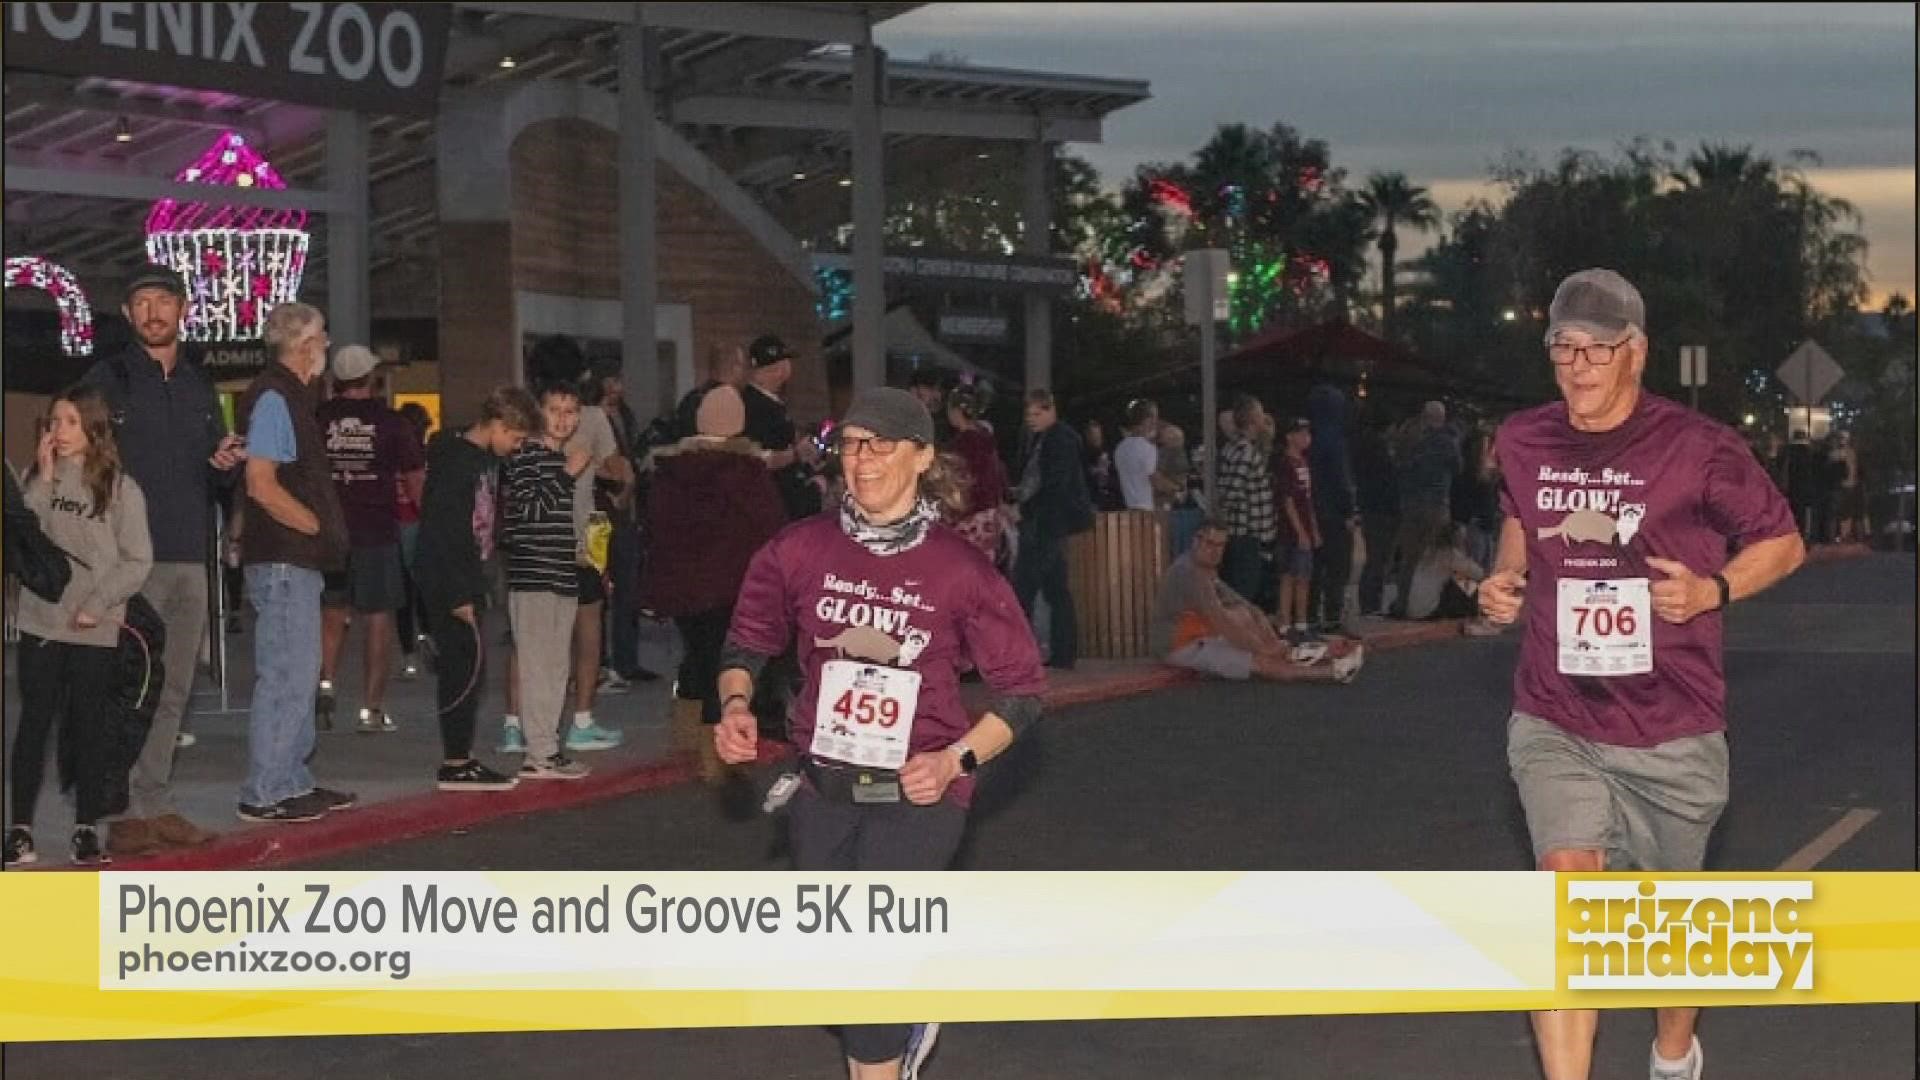 Grab your running shoes because the Phoenix Zoo is hosting their annual Move and Groove 5K this Saturday. Get your tickets at phoenixzoo.org